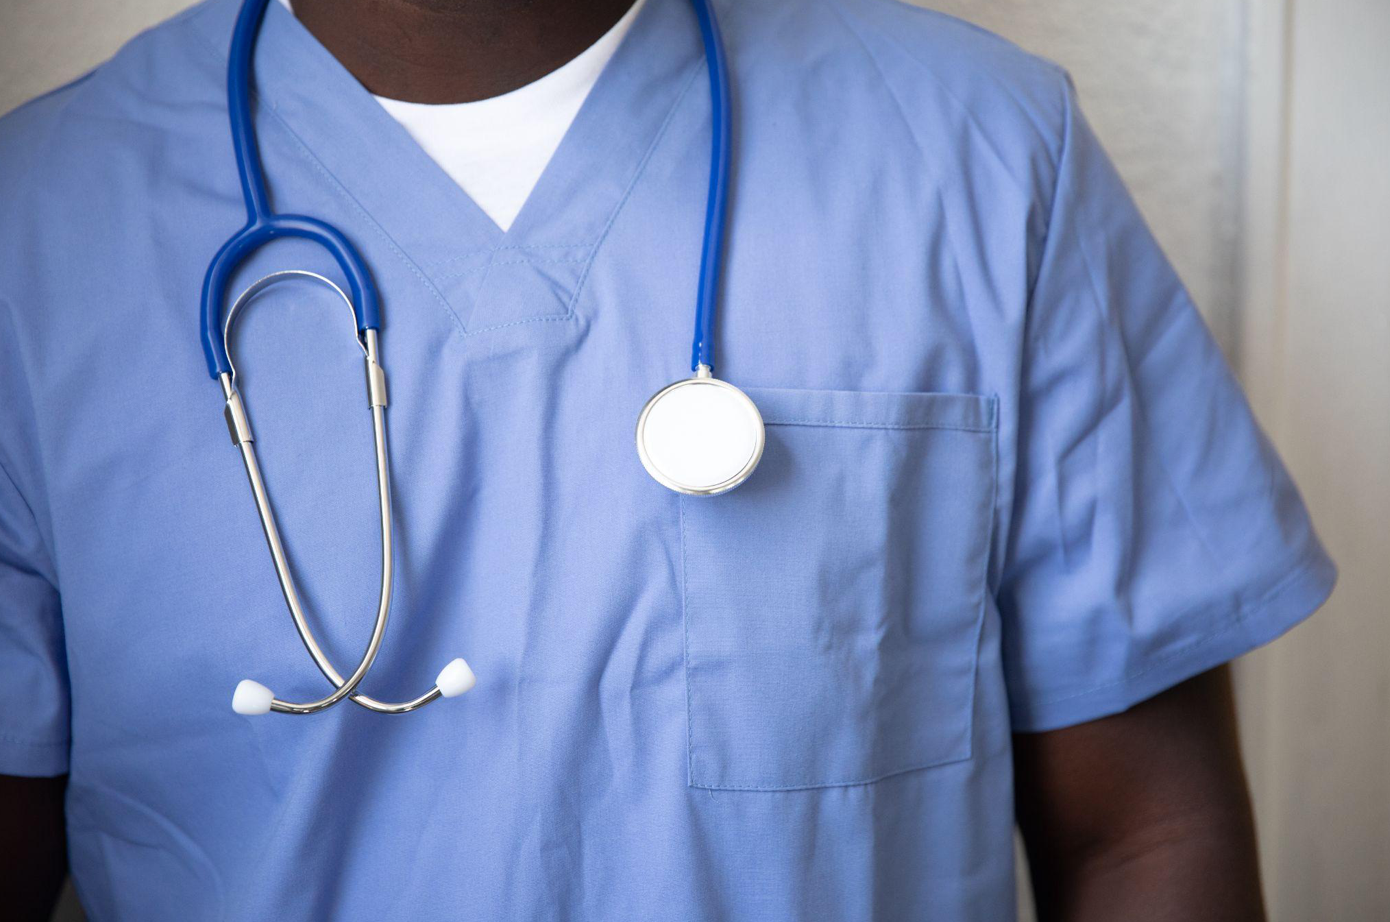 Black man in blue scrubs with stethoscope around his neck; image by Nappy, via Unsplash.com.